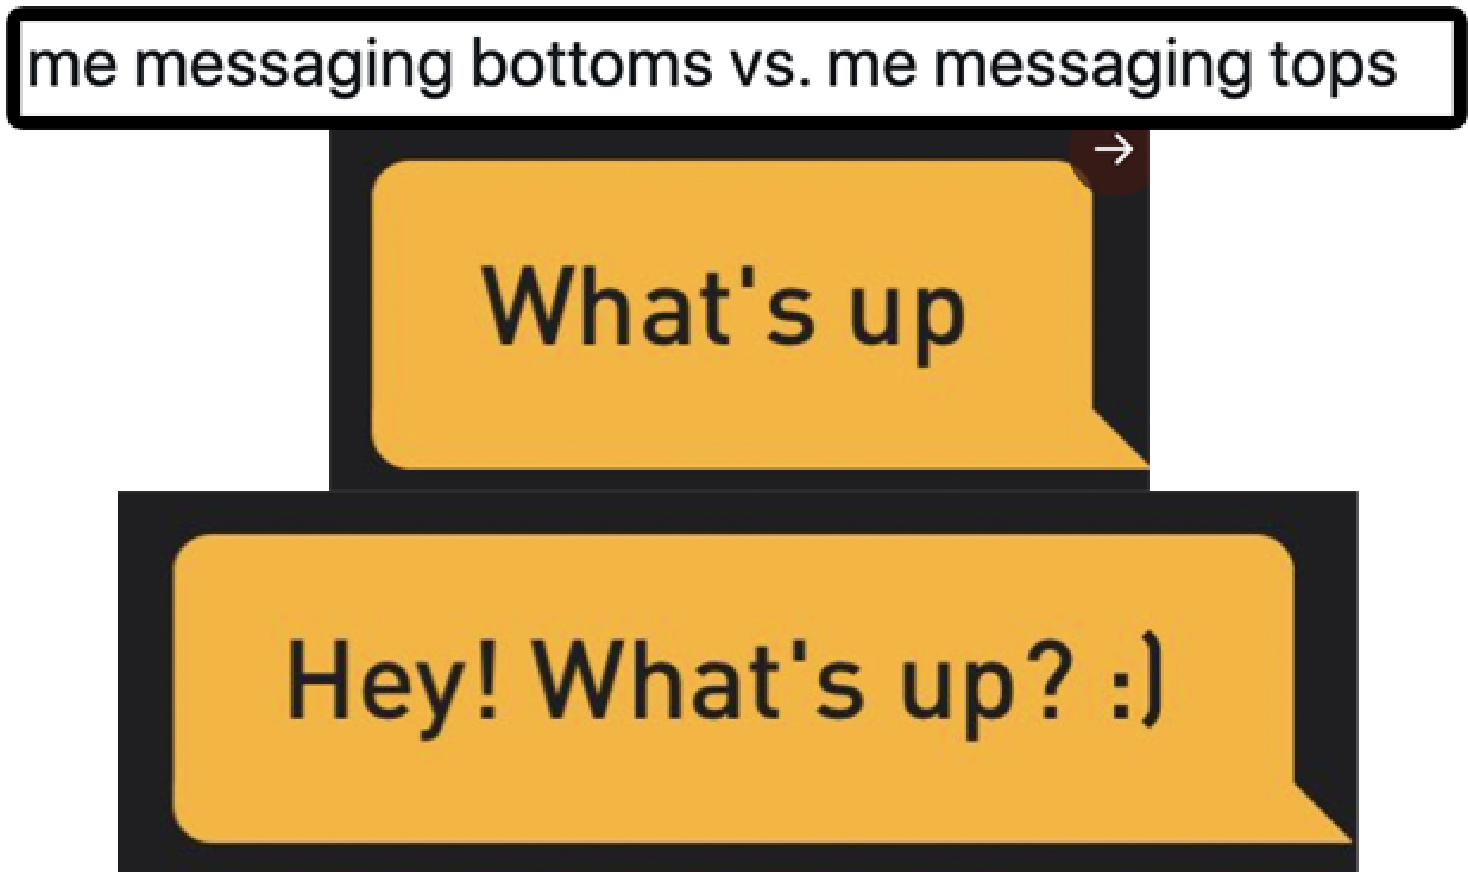 Messaging tops &quot;What&#x27;s Up&quot; on Grindr vs. messaging bottoms, &quot;Hey! What&#x27;s up? :)&quot;